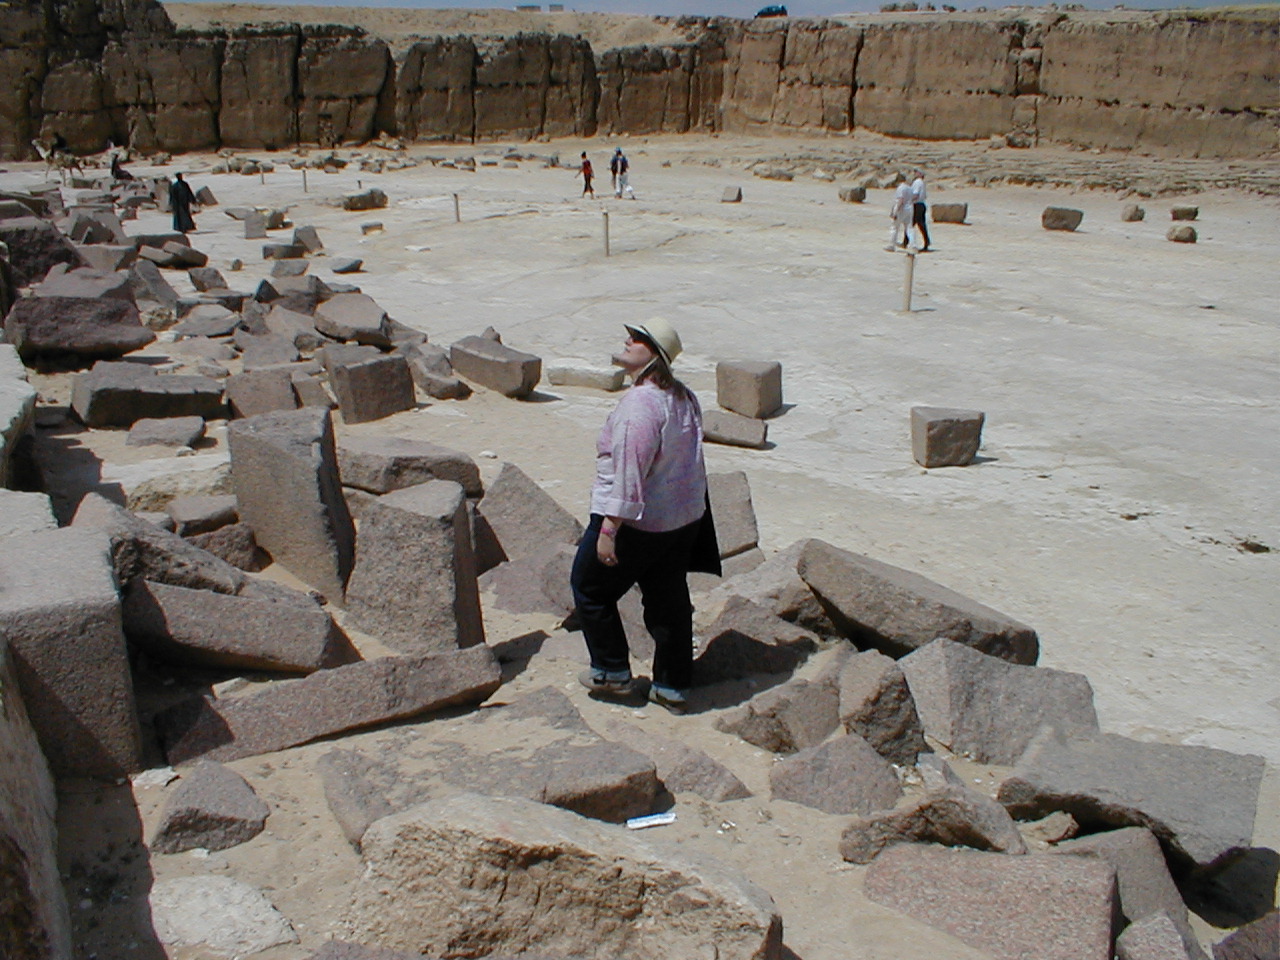 a woman stands on rocks in the middle of an open area